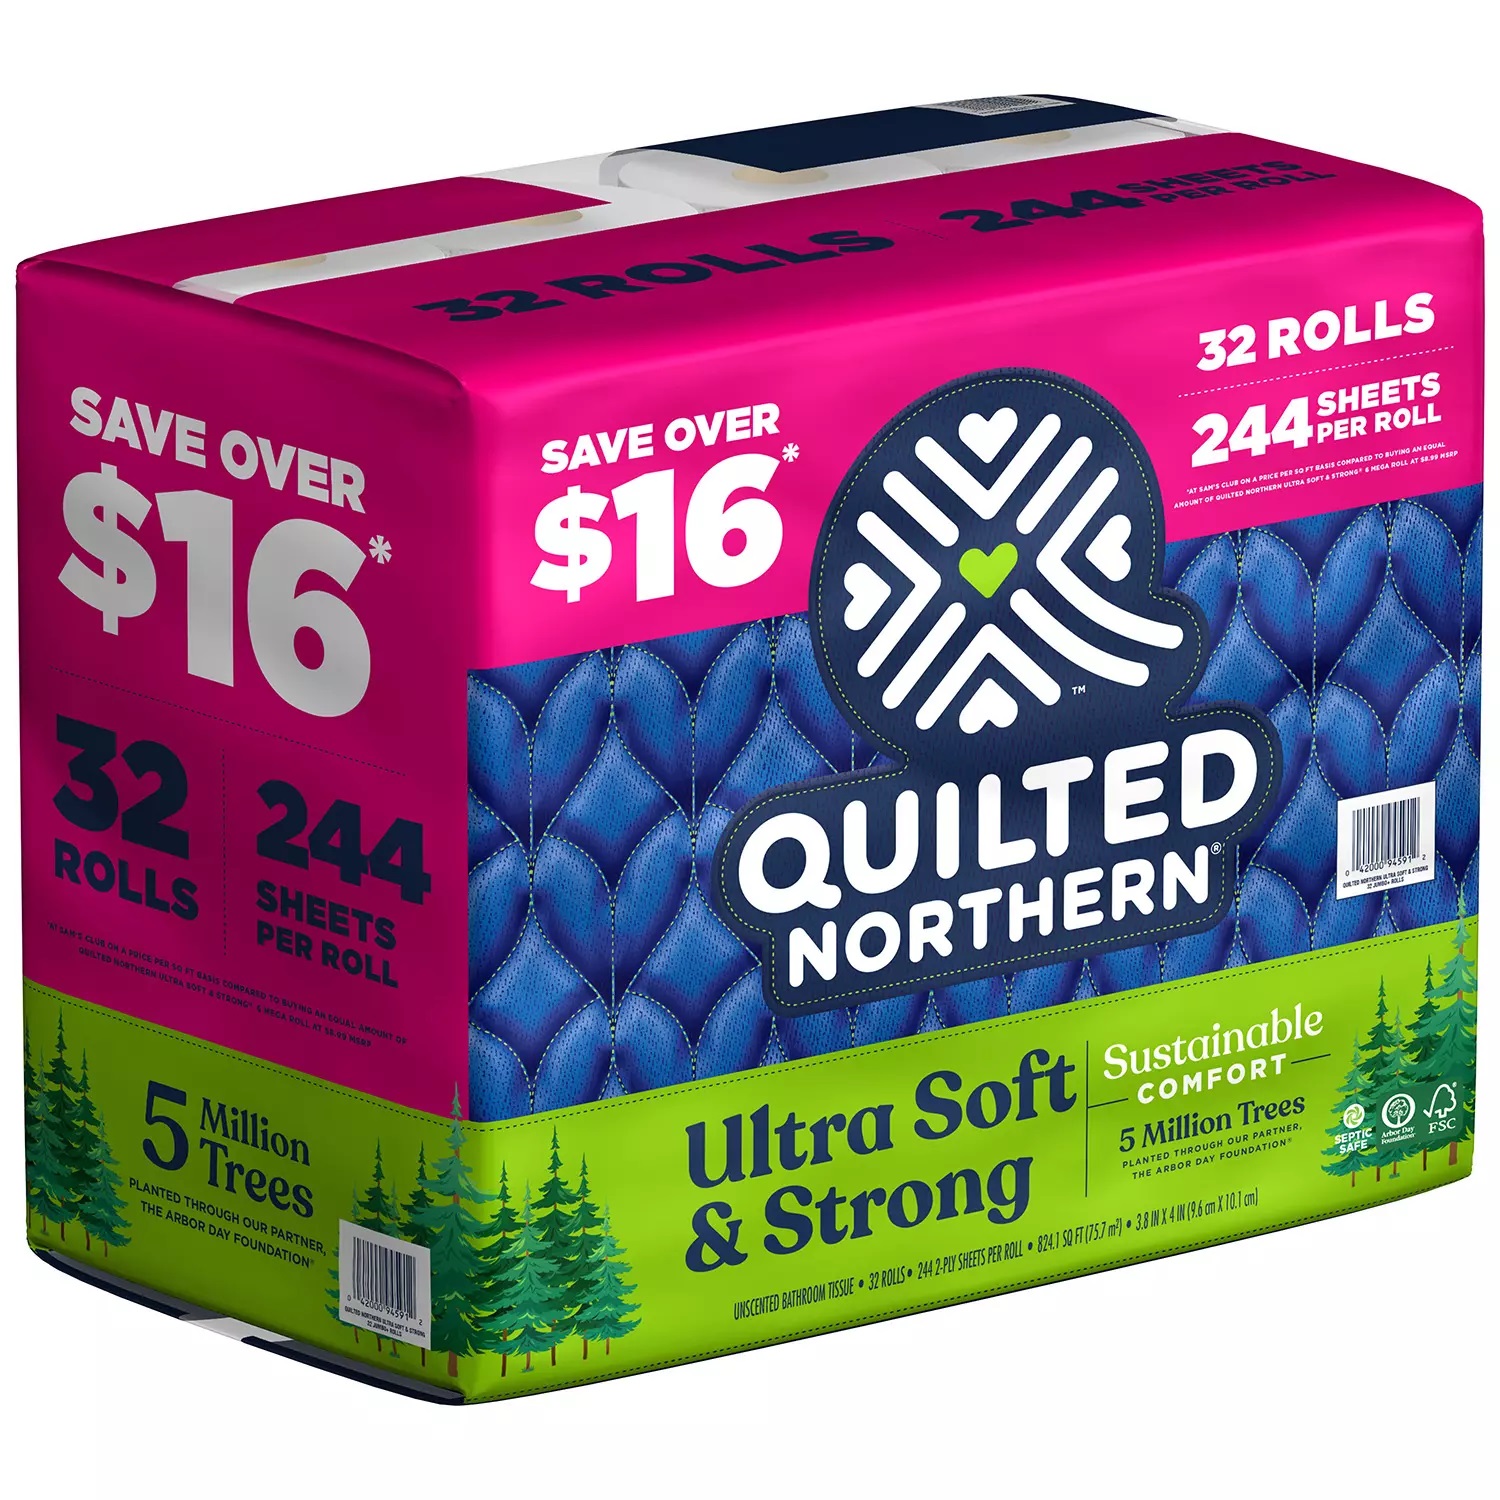 Quilted Northern Ultra Soft & Strong Toilet Paper (244 Sheets/Roll, 32 Rolls)